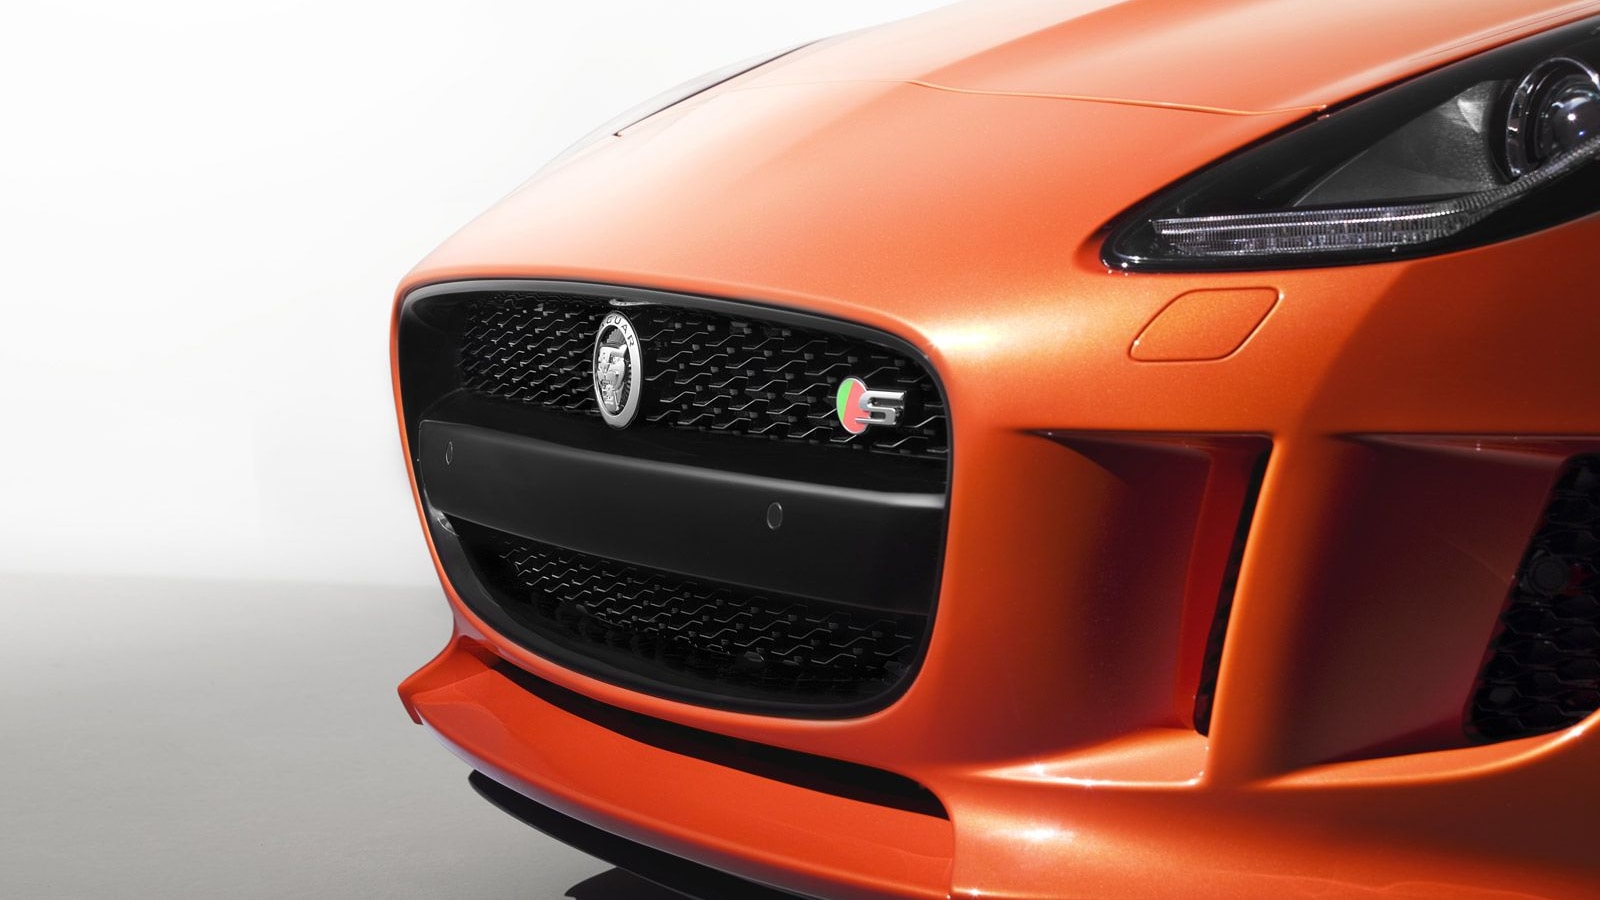 2014 Jaguar F-Type with Firesand paint and Design and Black exterior and interior upgrades